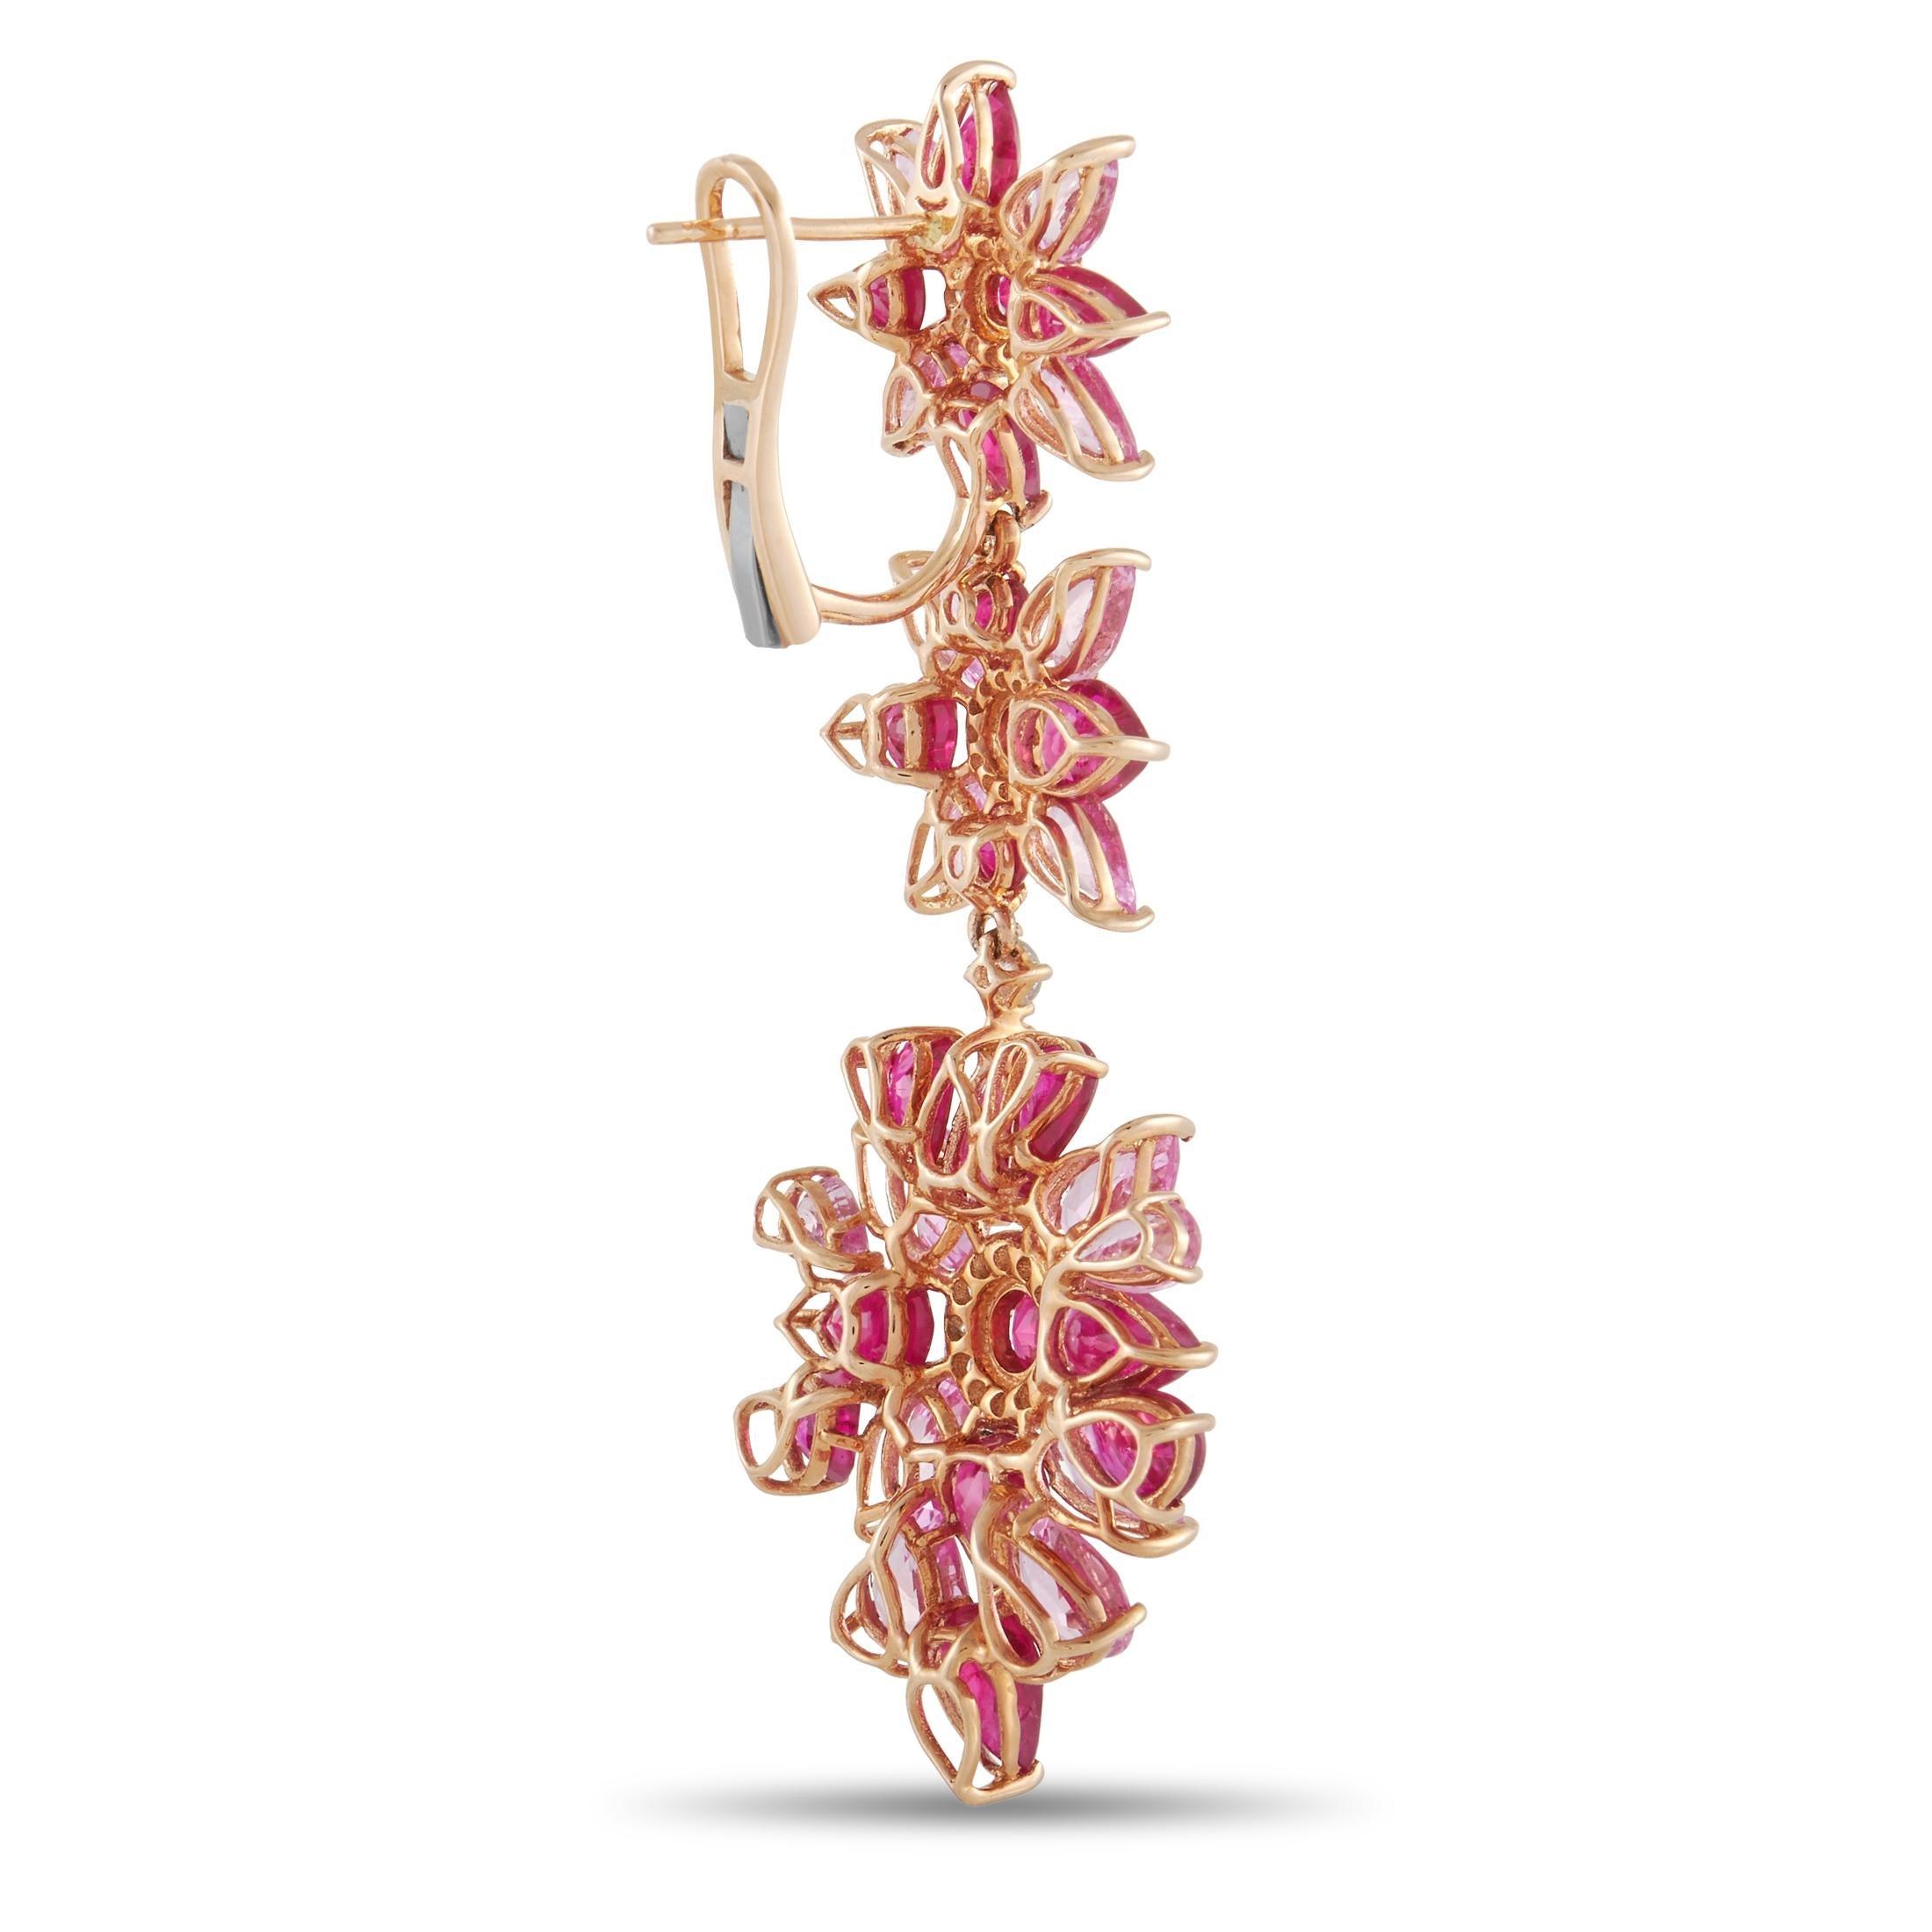 Express your personality through this pair of floral statement earrings. Fashioned in 18K rose gold and decorated with diamonds, rubies, and sapphires, these blushing pink floral drop earrings will give a luxuriously romantic twist to whatever you